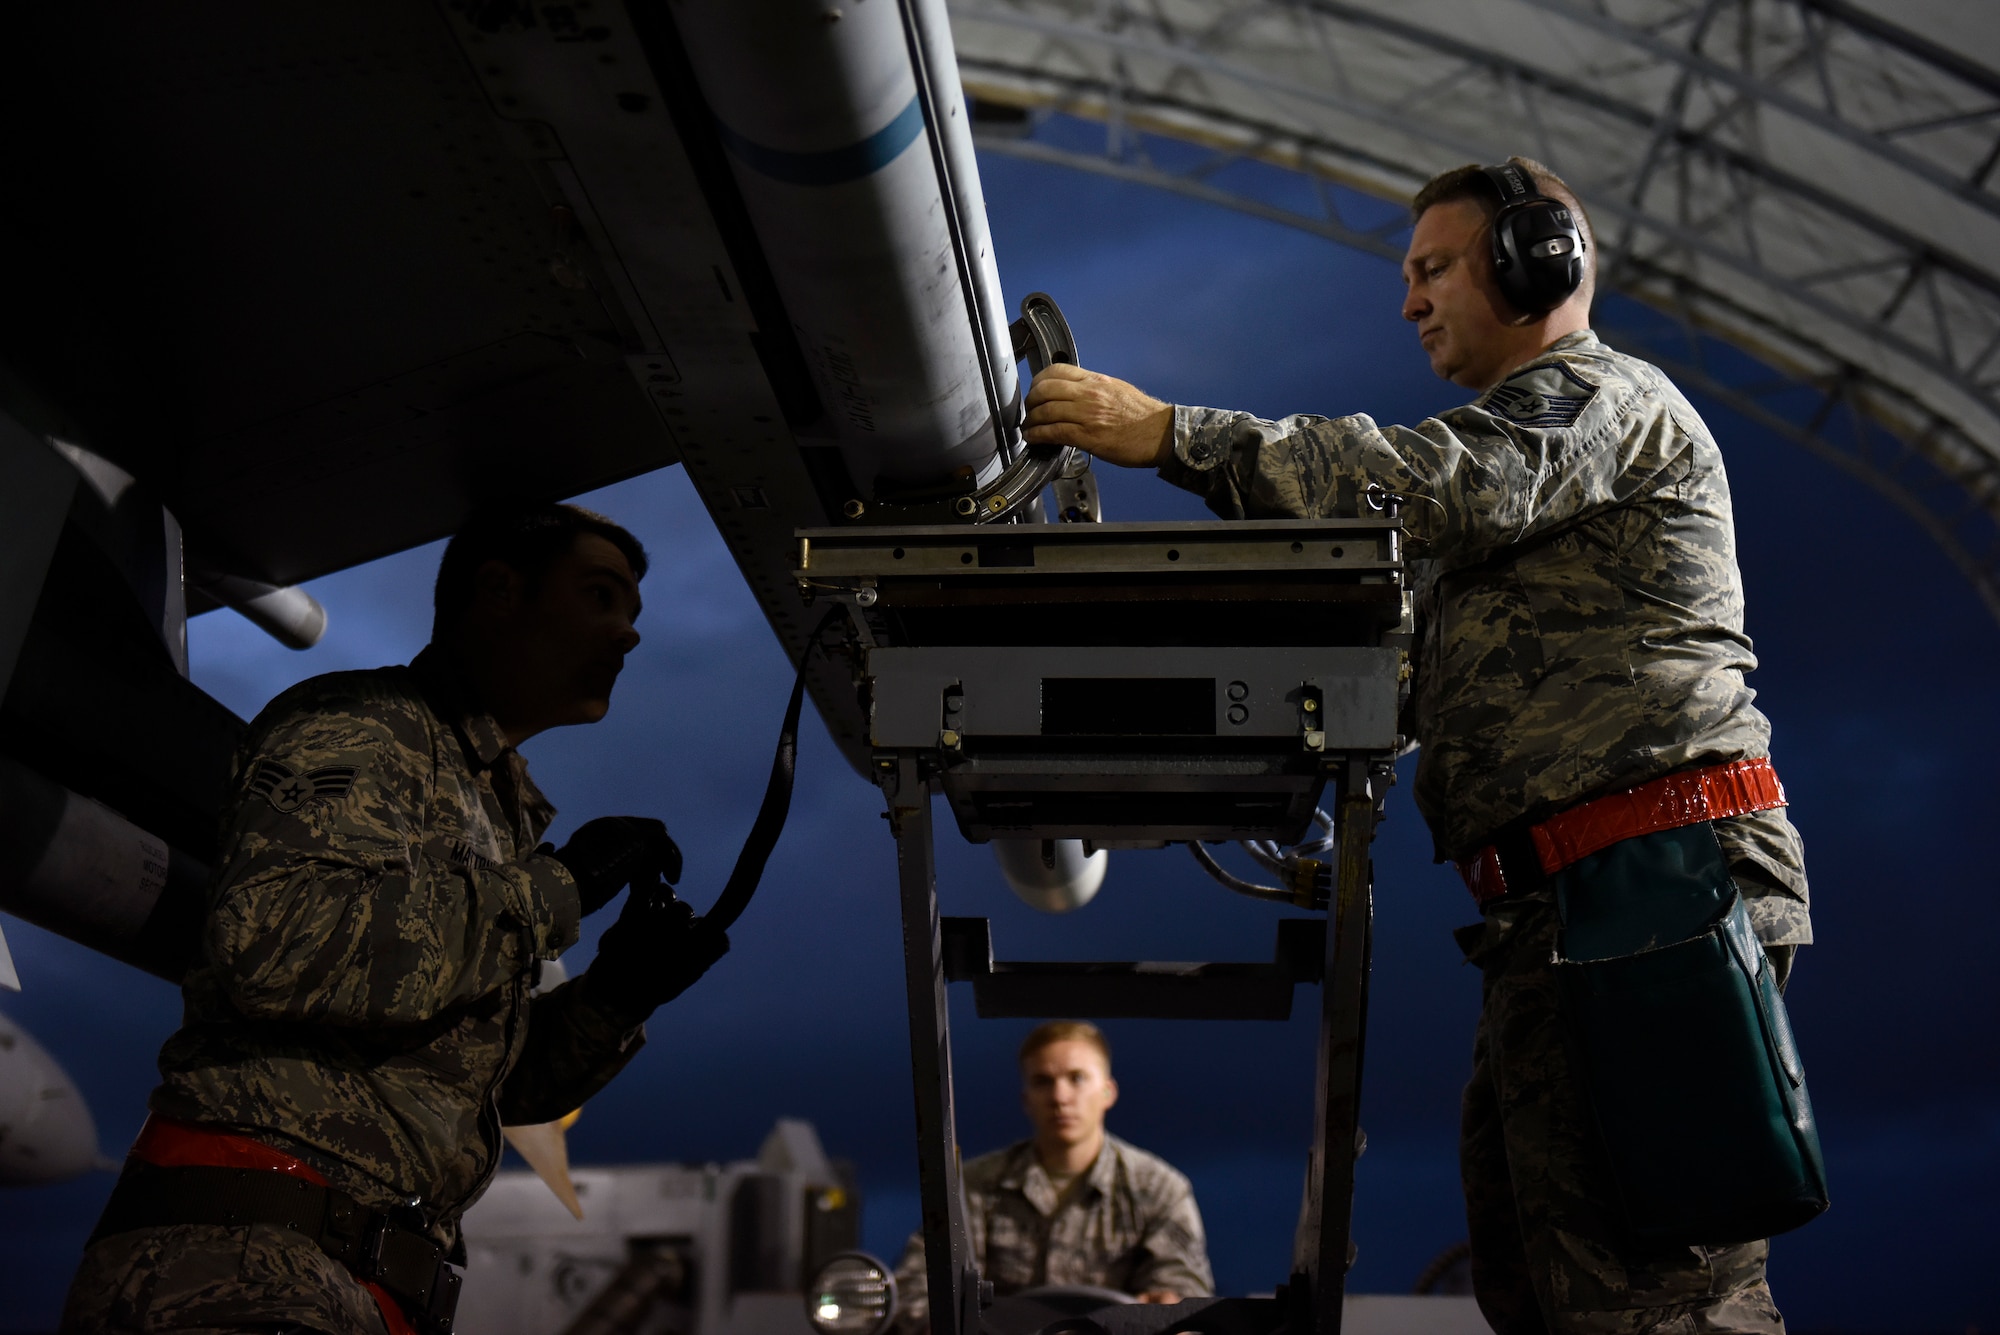 U.S. Air Force Senior Airman Justin Mattoni, Staff Sgt. Devon Childress and Master Sgt. Davis Mills, a weapons load team assigned to the 112th Expeditionary Fighter Squadron, conduct a cross-load Feb. 22, 2016, during exercise COPE NORTH 16 at Andersen Air Force Base, Guam. Training exercises such as CN16, allow the U.S., Japan and Australia air forces to develop combat capabilities, enhancing air superiority, electronic warfare, air interdiction, tactical airlift and aerial refueling. (U.S. Air National Guard photo by Staff Sgt. Shane Hughes/Released)